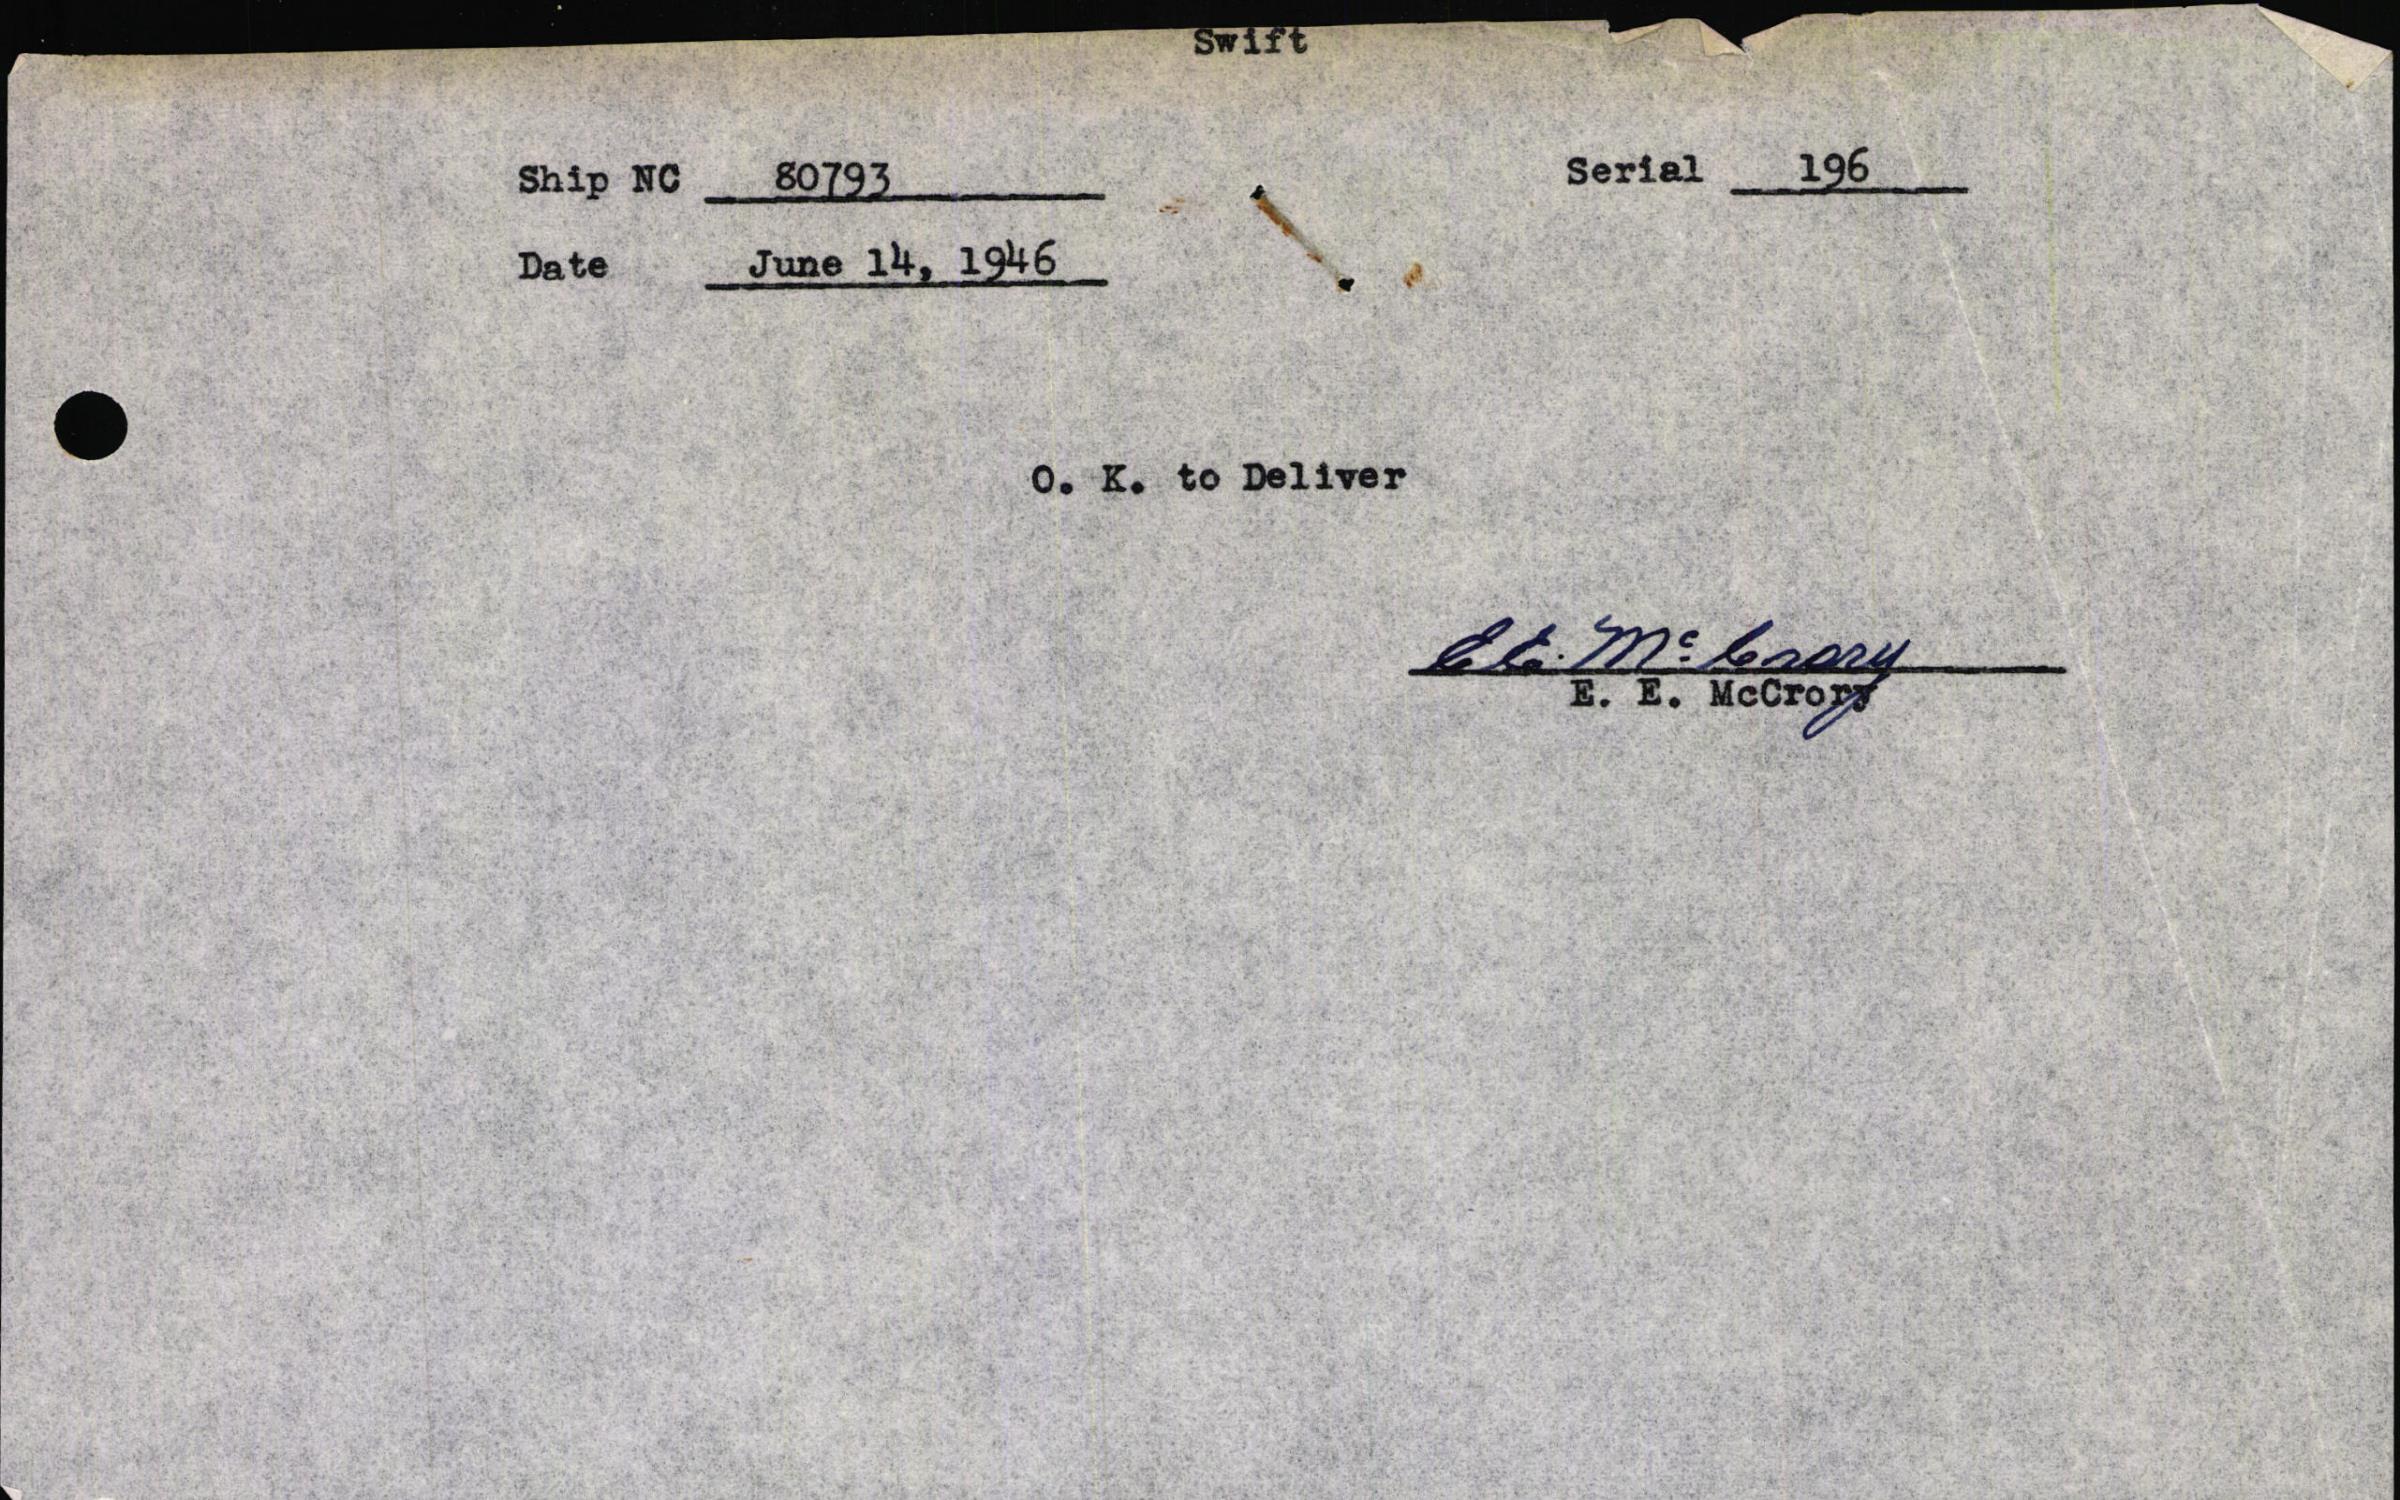 Sample page 3 from AirCorps Library document: Technical Information for Serial Number 196